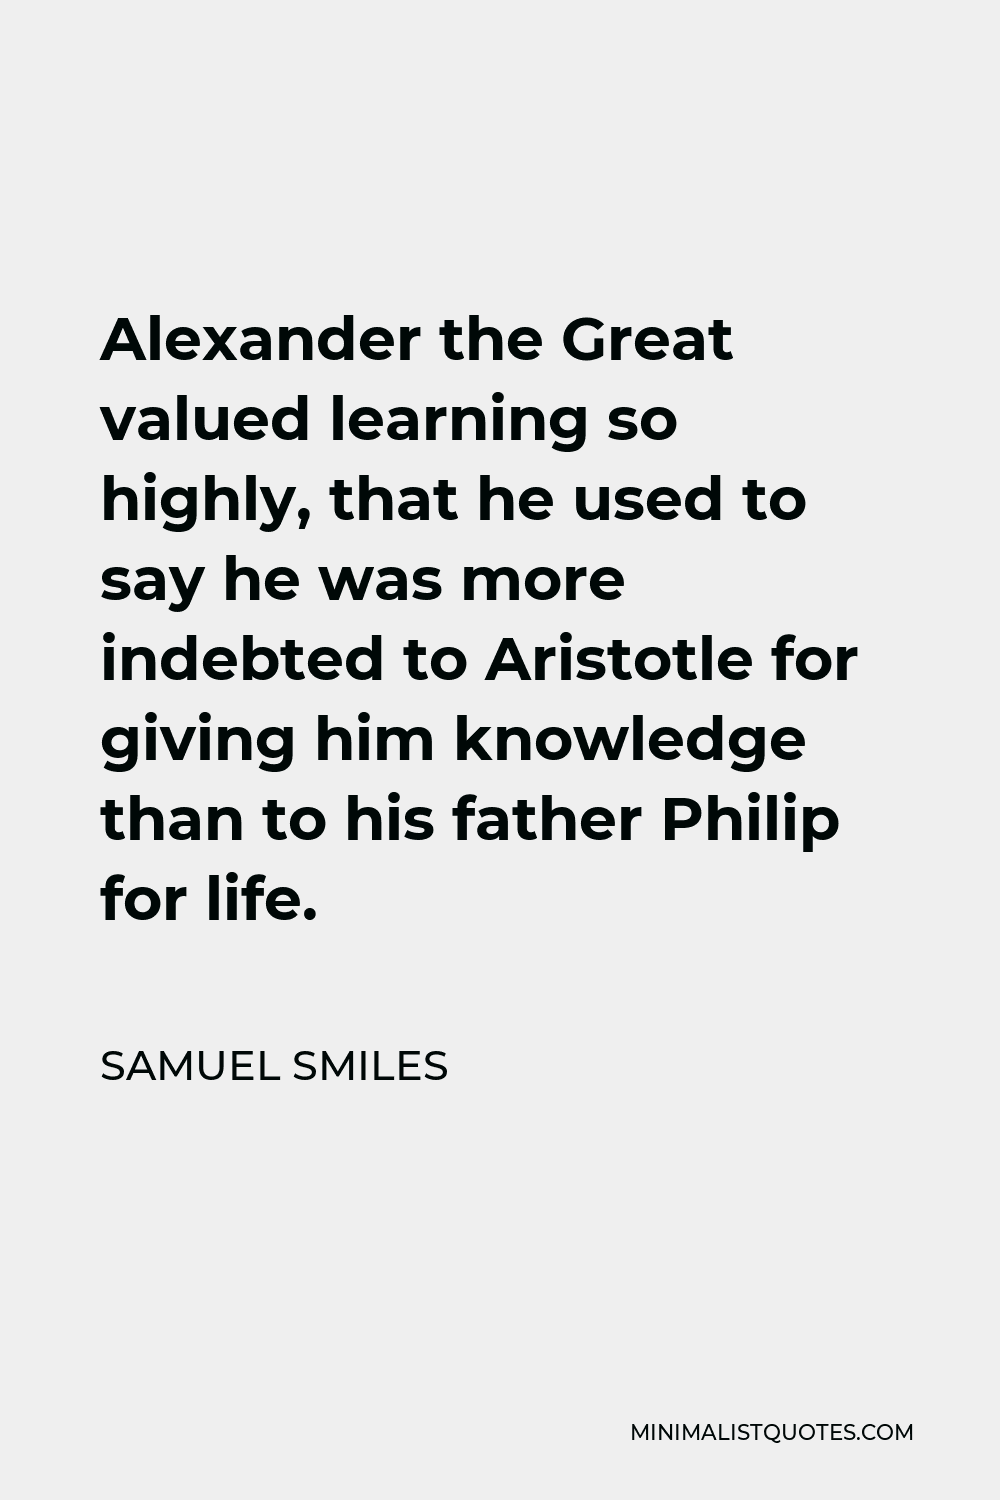 Samuel Smiles Quote - Alexander the Great valued learning so highly, that he used to say he was more indebted to Aristotle for giving him knowledge than to his father Philip for life.